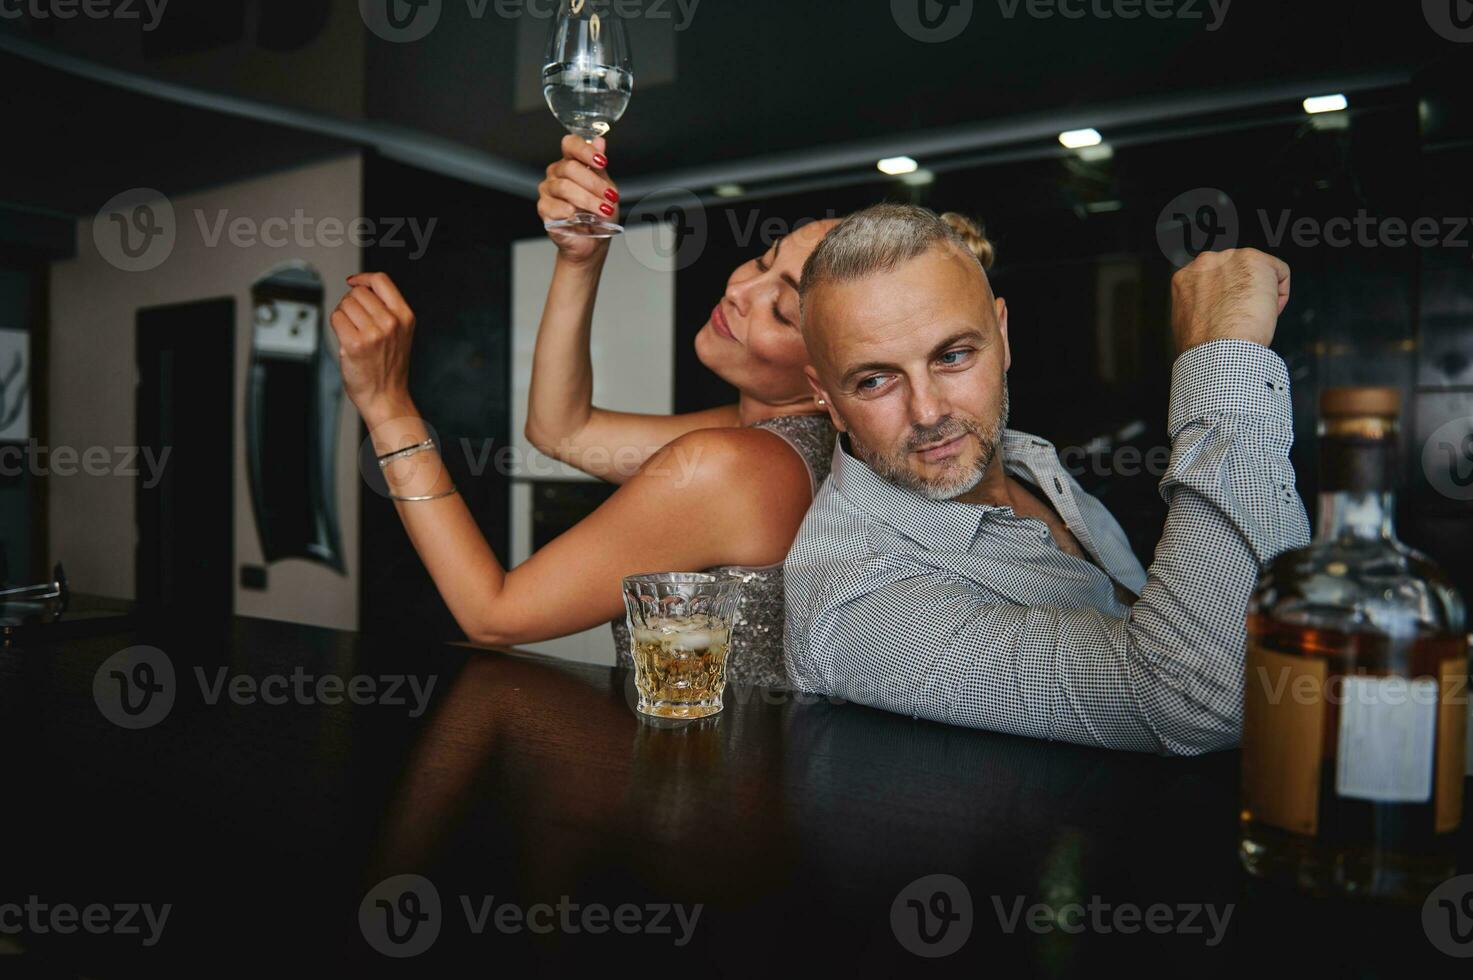 Attractive tanned European woman and handsome Caucasian middle aged man drinking alcohol and having fun together while celebrating an event at home bar. Flirt, seduction, Couple relationships concept photo